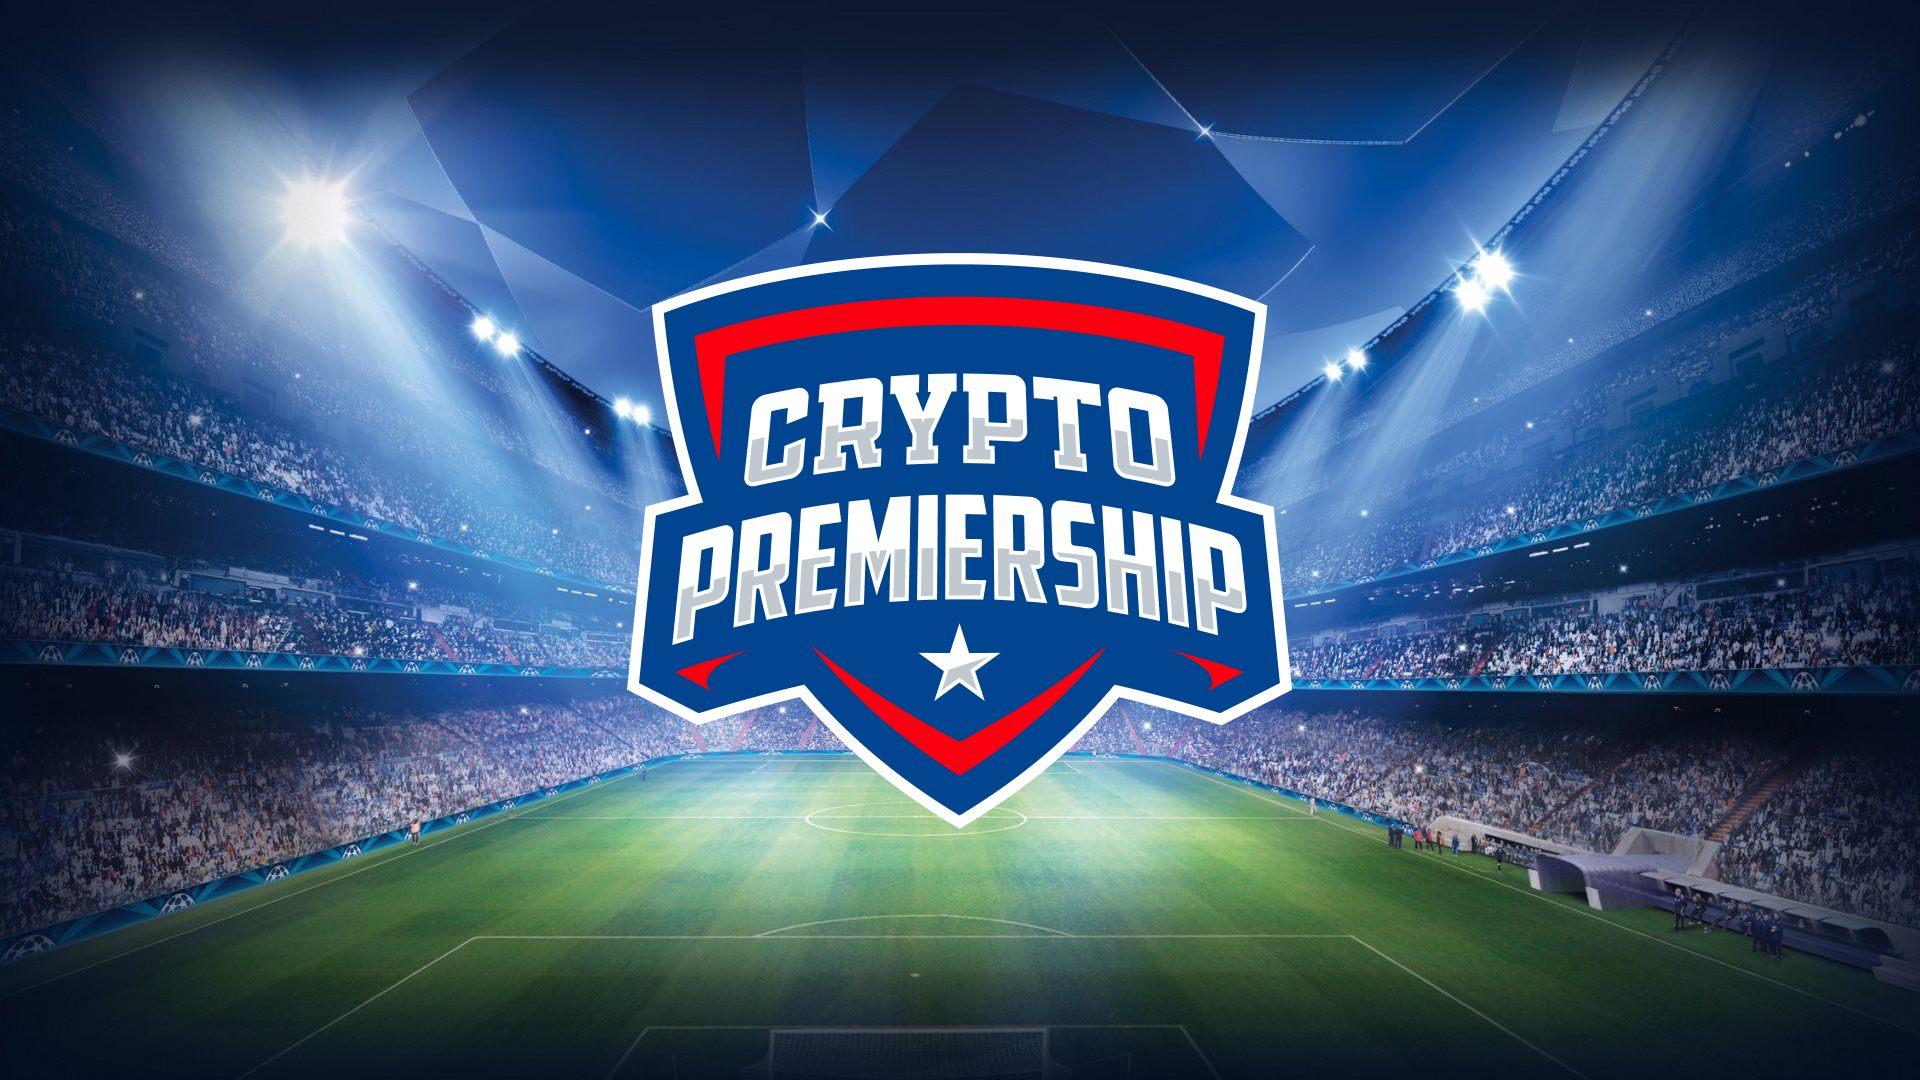 Lady Eagles v Frozen Wings - Crypto Premiership 2022, Online Event